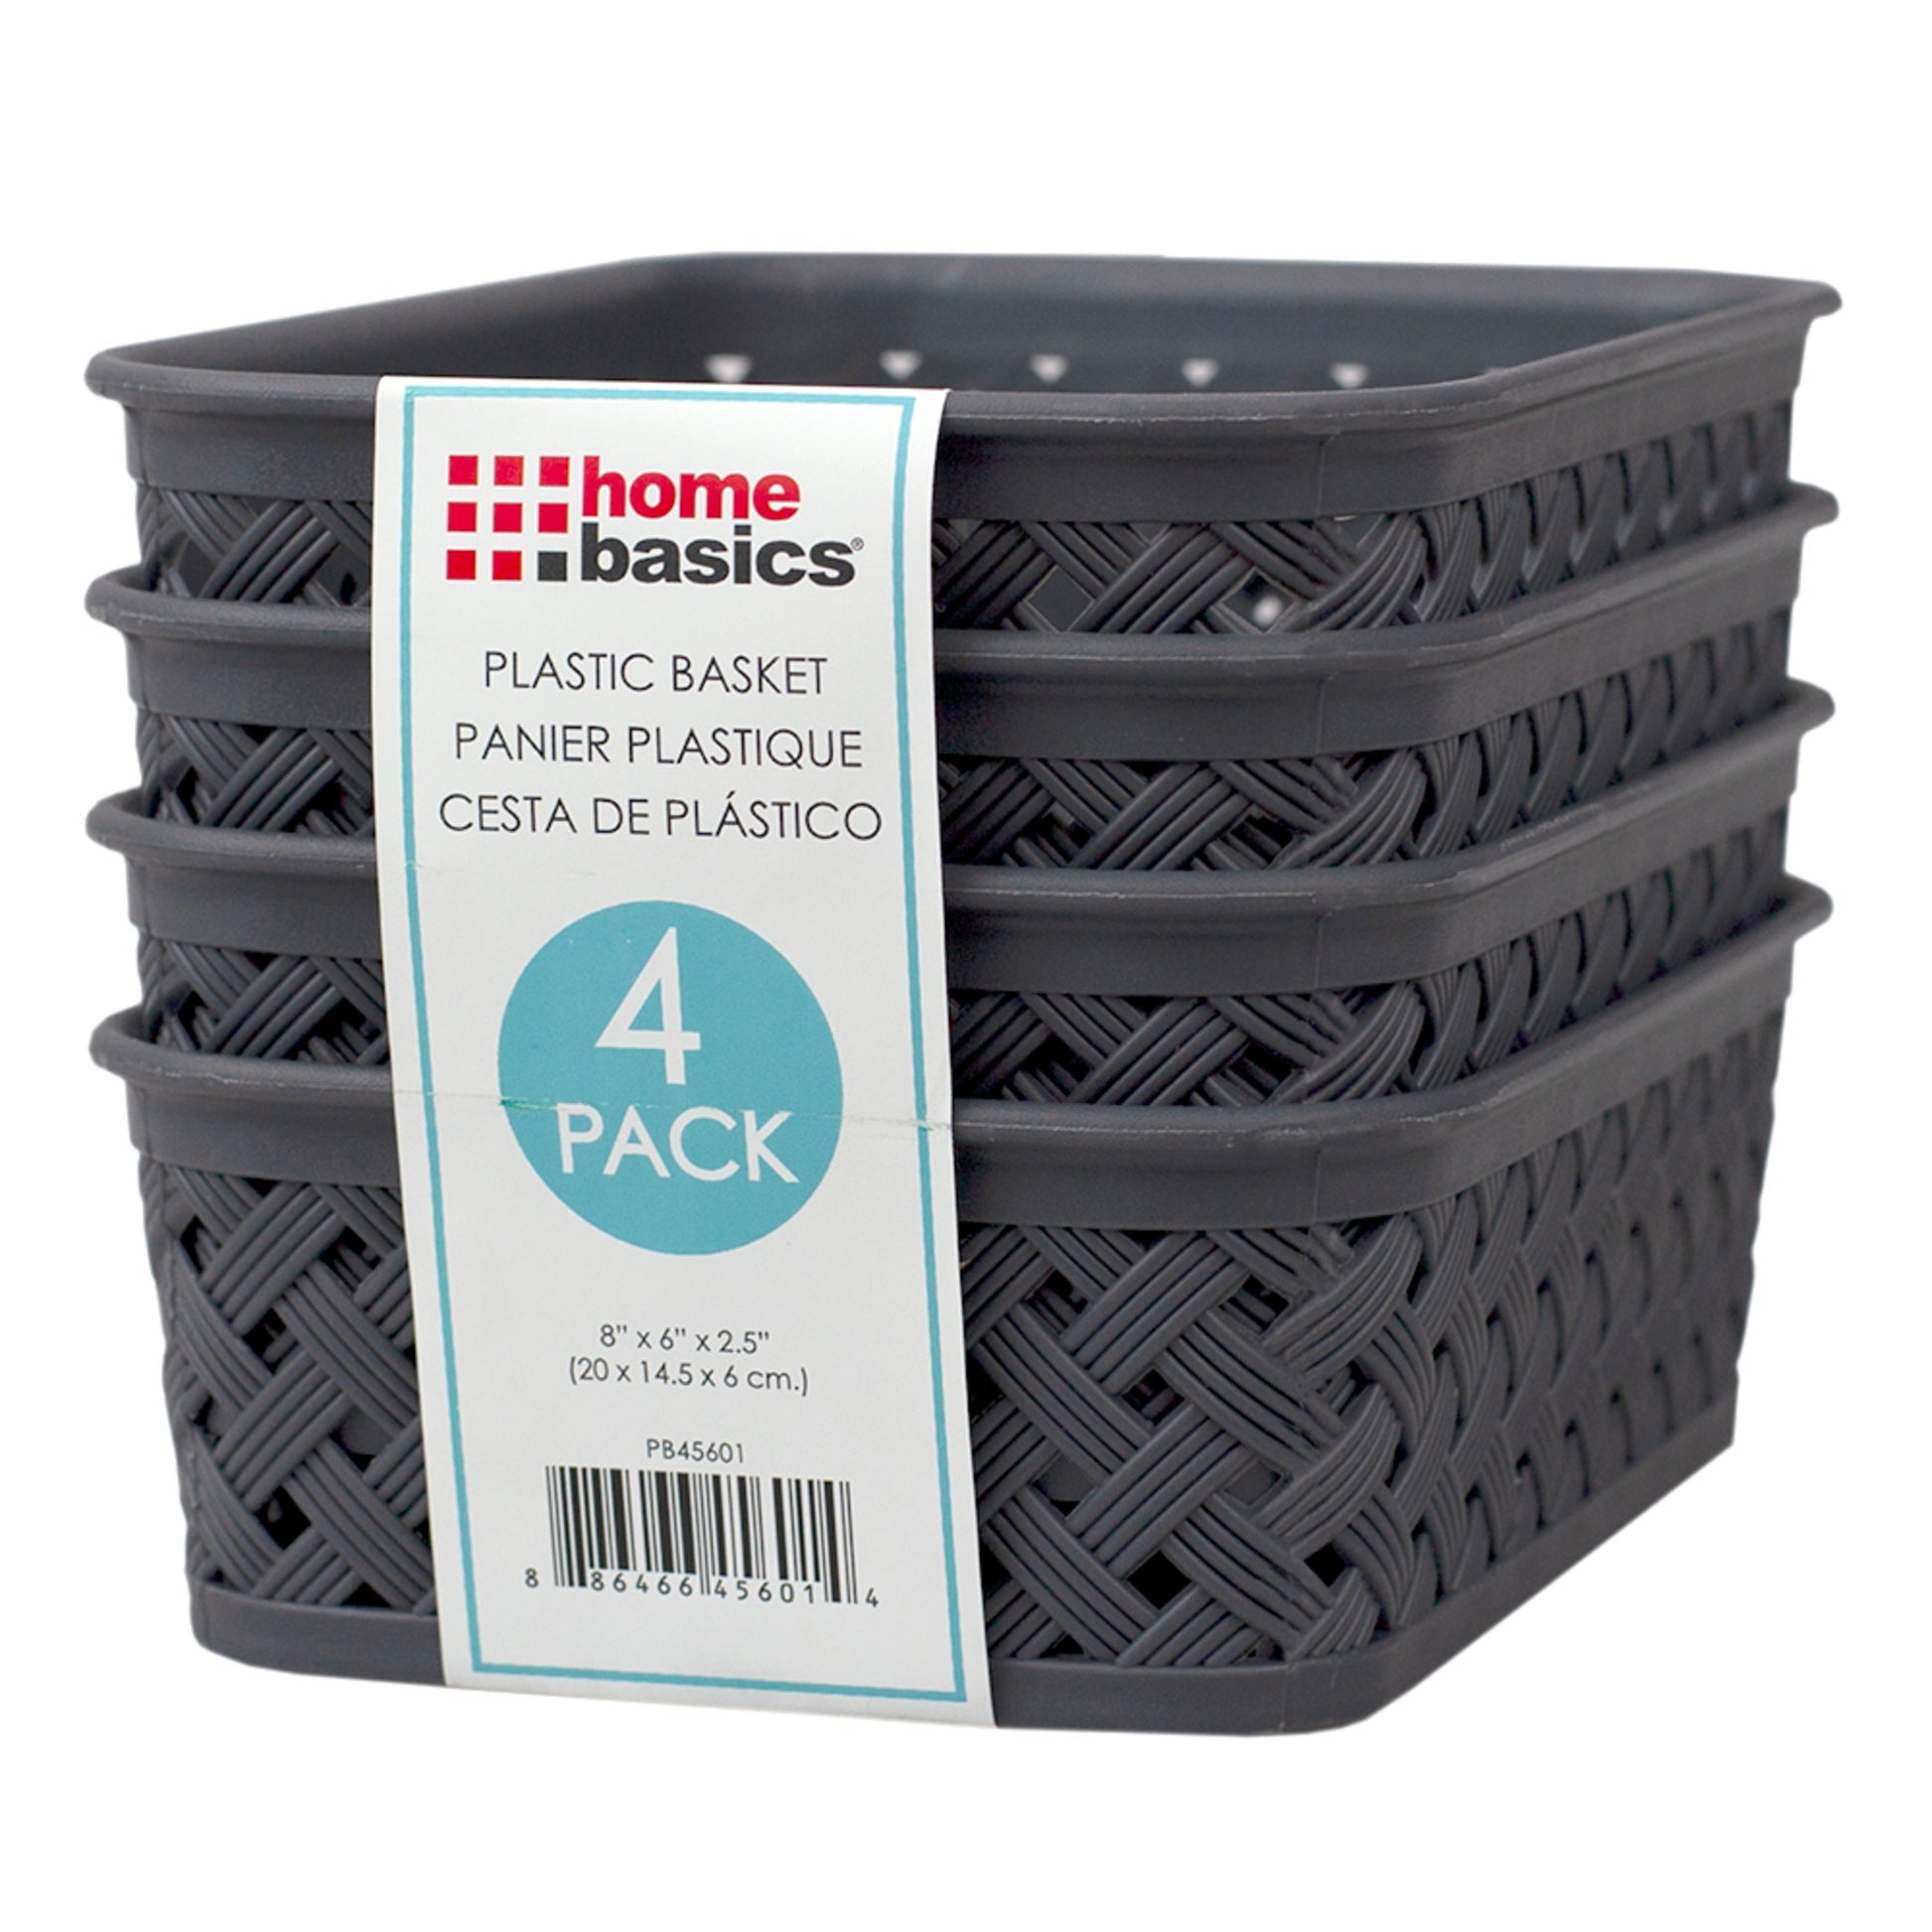 Home Basics Triple Woven 7.75" x 5.25" x 2.5" Multi-Purpose Stackable Plastic Storage Basket, (Pack of 4), Grey - Grey